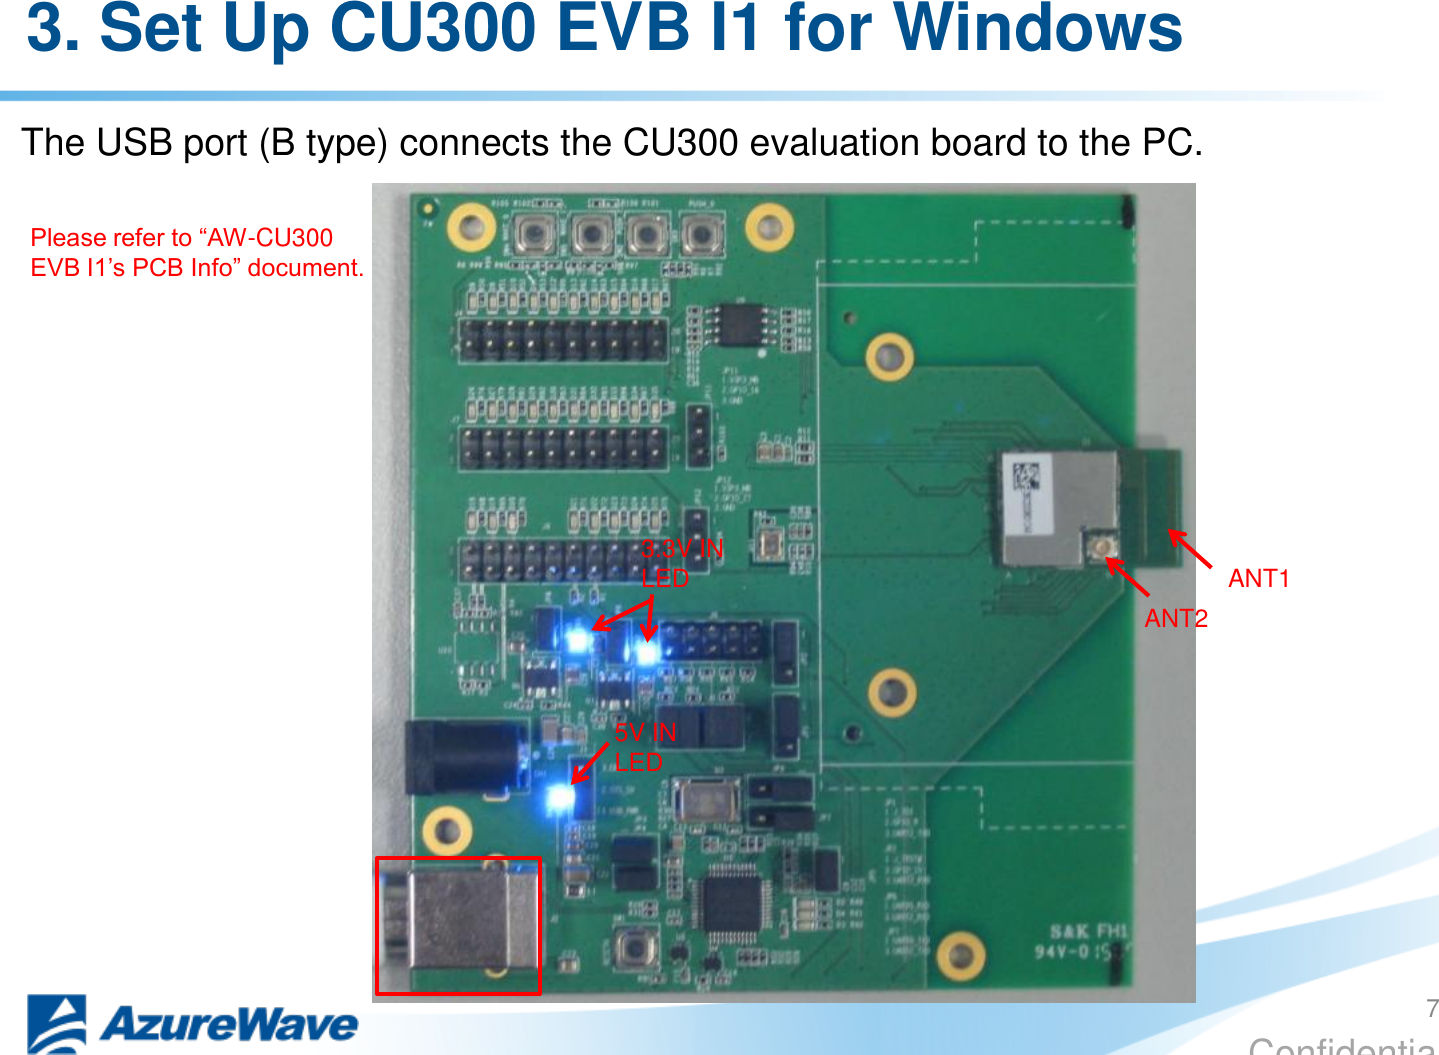 Confidential 3. Set Up CU300 EVB I1 for Windows The USB port (B type) connects the CU300 evaluation board to the PC. ANT2 ANT1 Please refer to “AW-CU300 EVB I1’s PCB Info” document. 7 5V IN LED 3.3V IN LED 